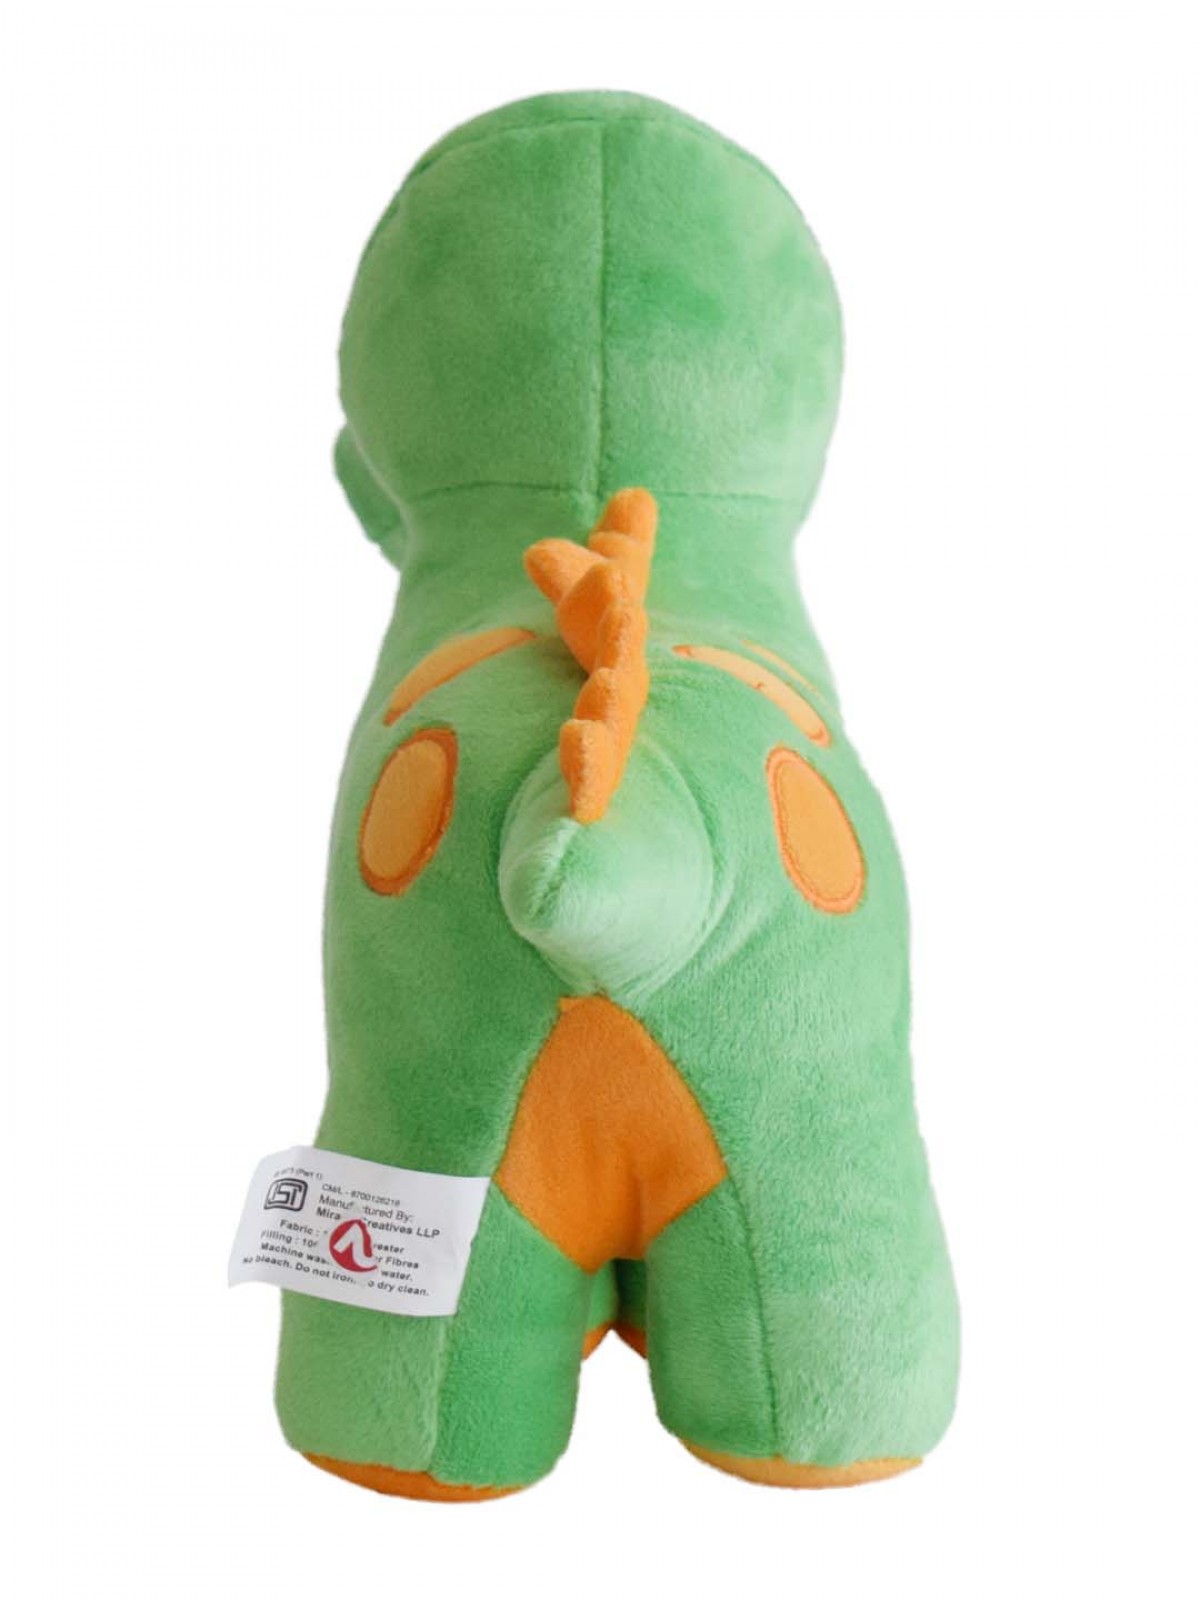 Adorable Stuffed Plush Dinosaur By Mirada, Soft Toys For Kids Of All Ages, 3Y+, Green, 30Cm